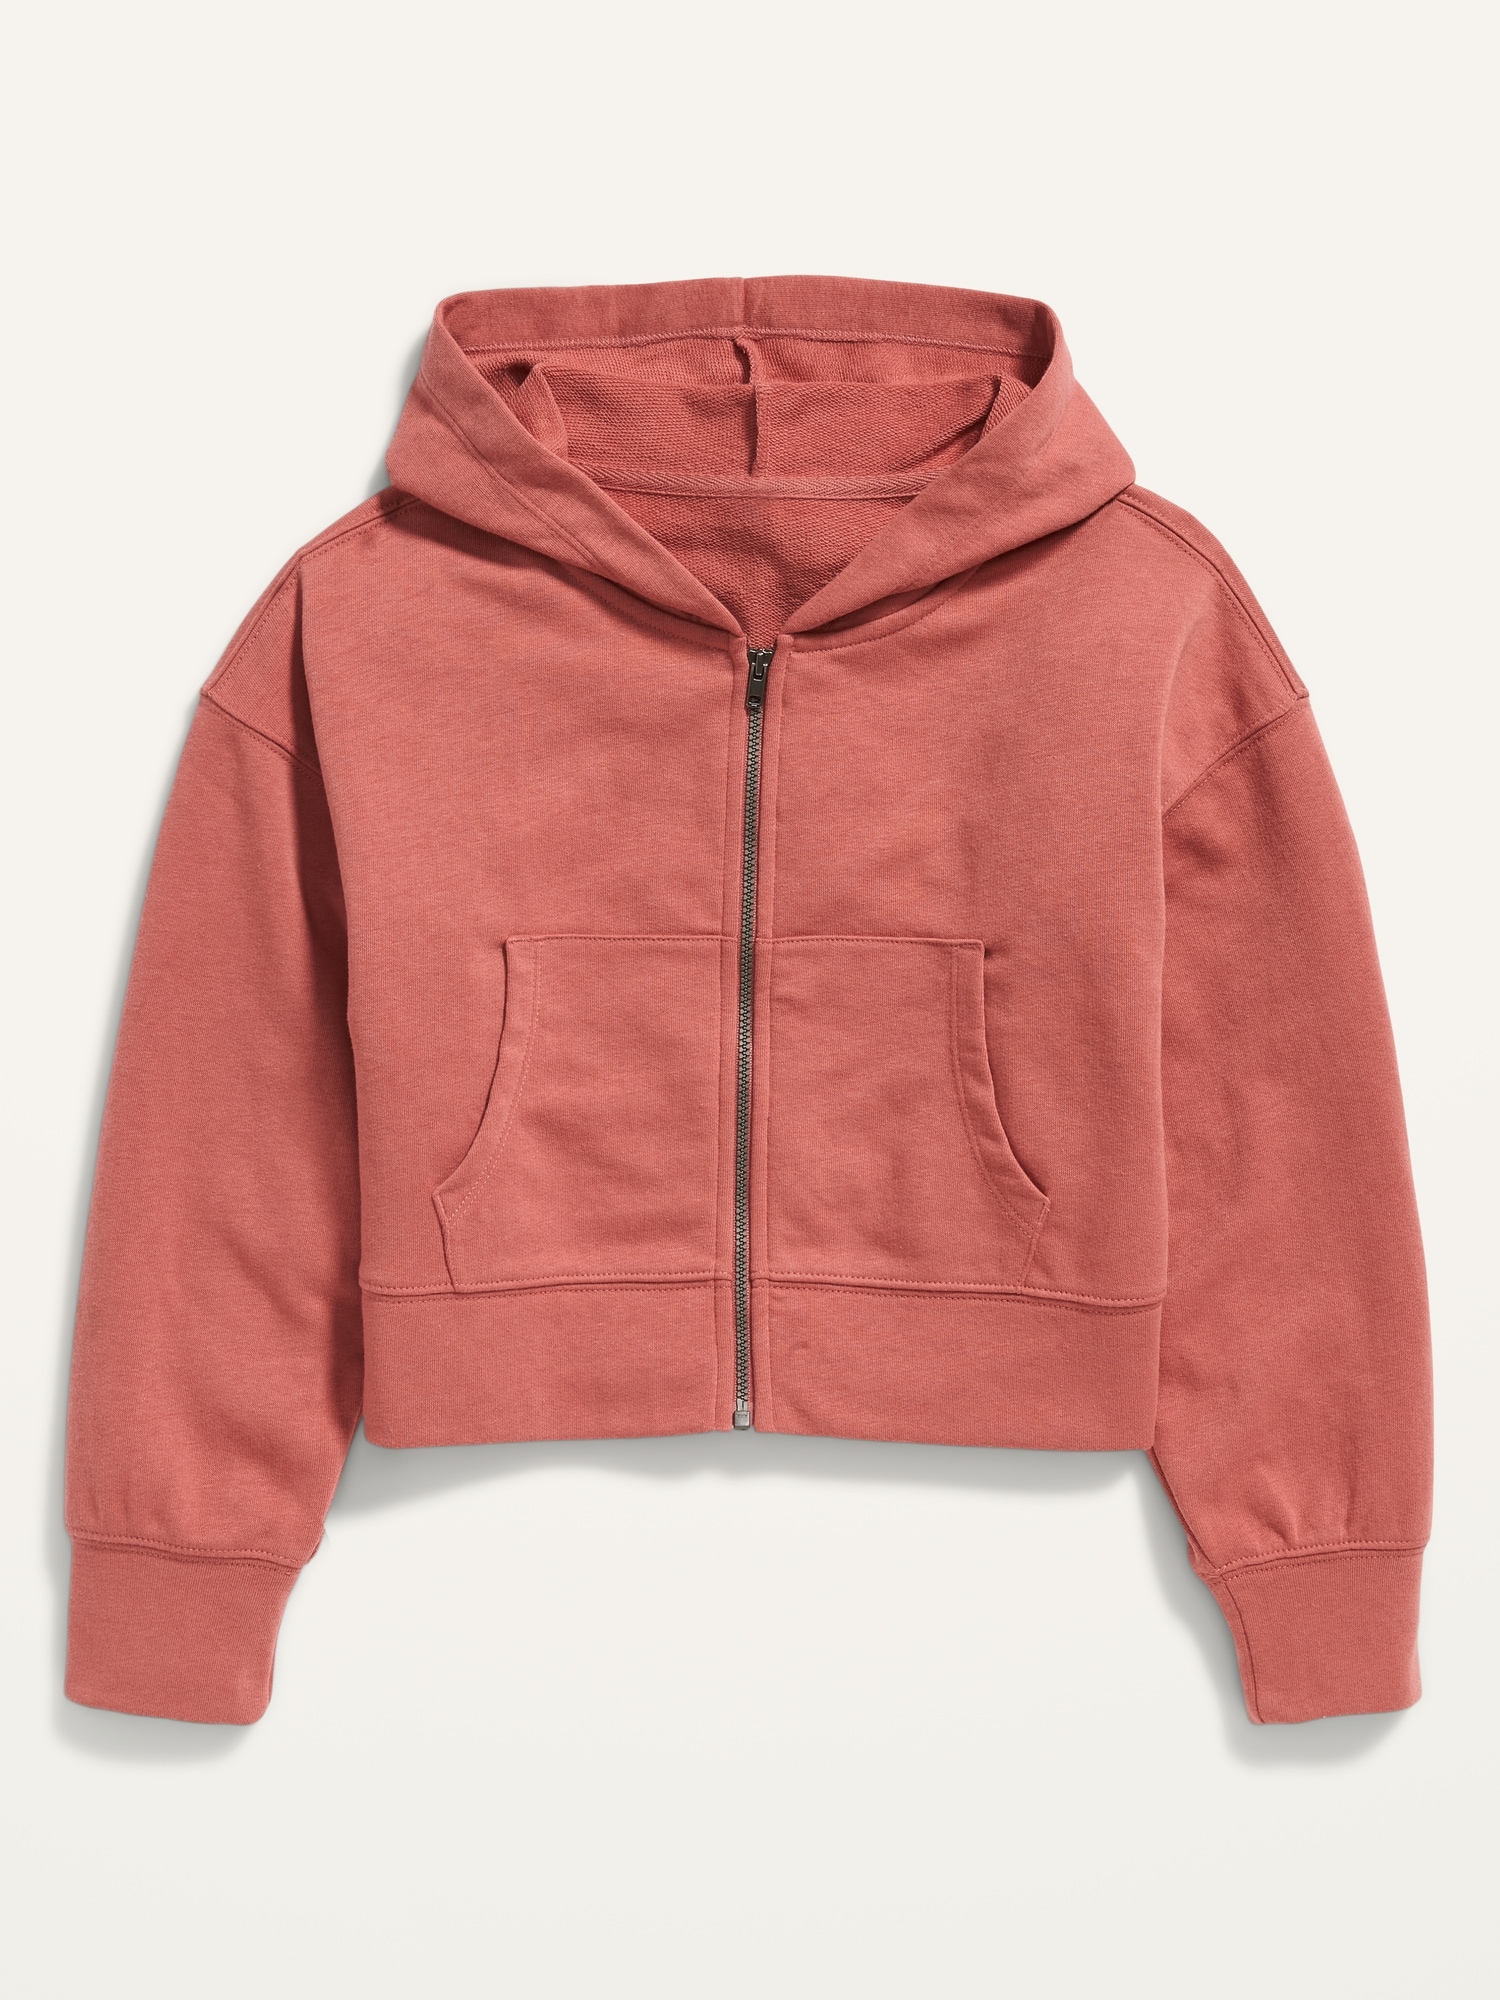 Vintage Zip-Front French Terry Hoodie for Girls